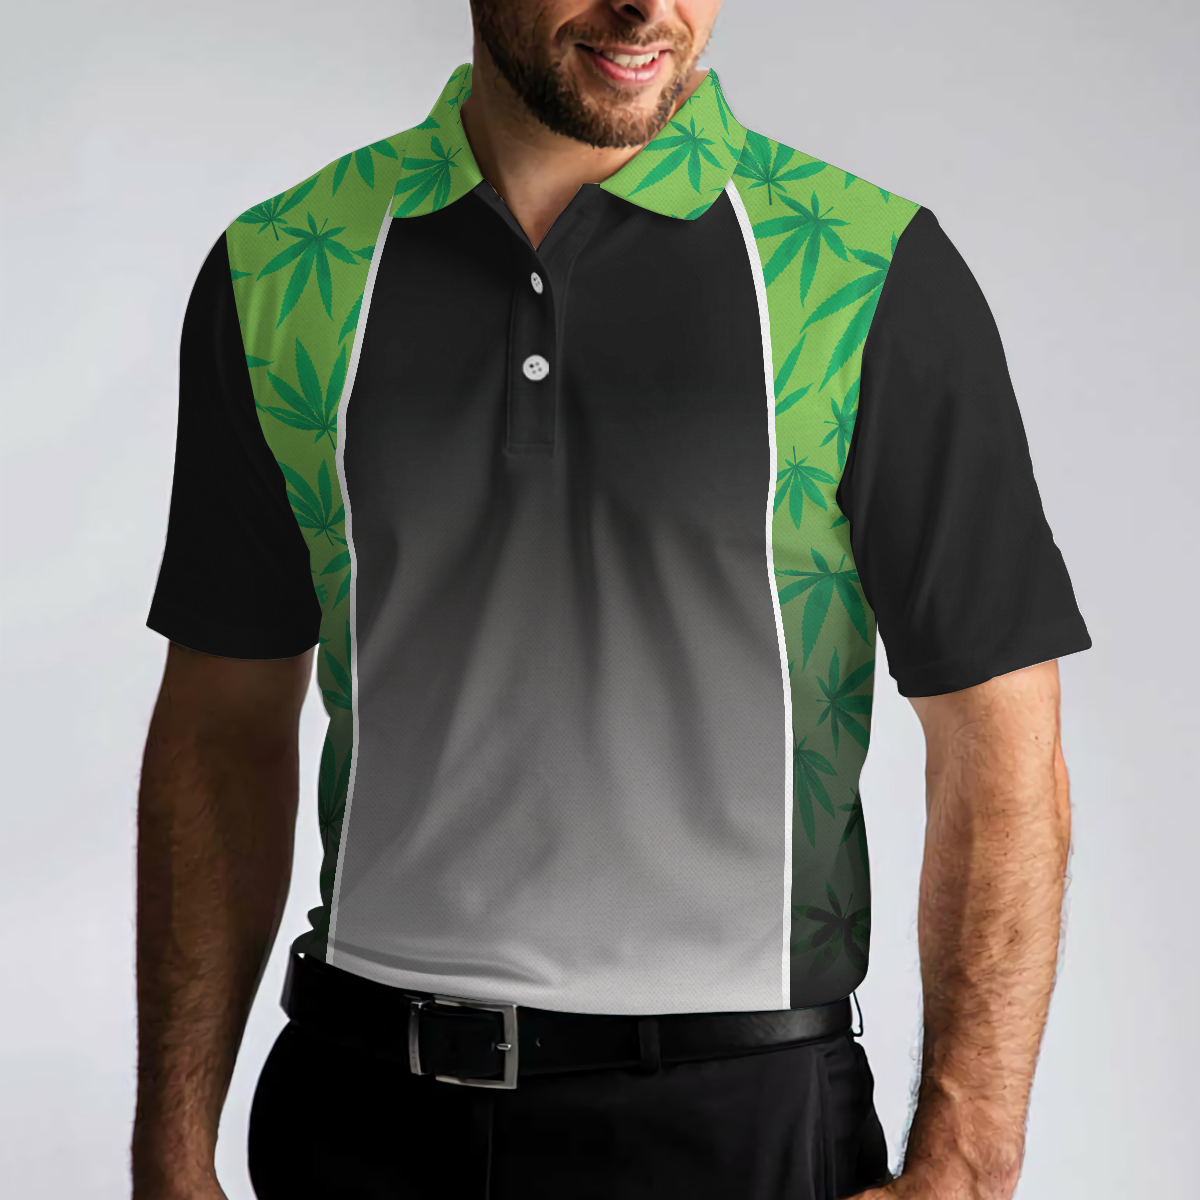 High Maintenance Weed Polo Shirt Green Weed Polo Shirt For Men Black Tie Dye Weed Pattern Shirt Design - 4